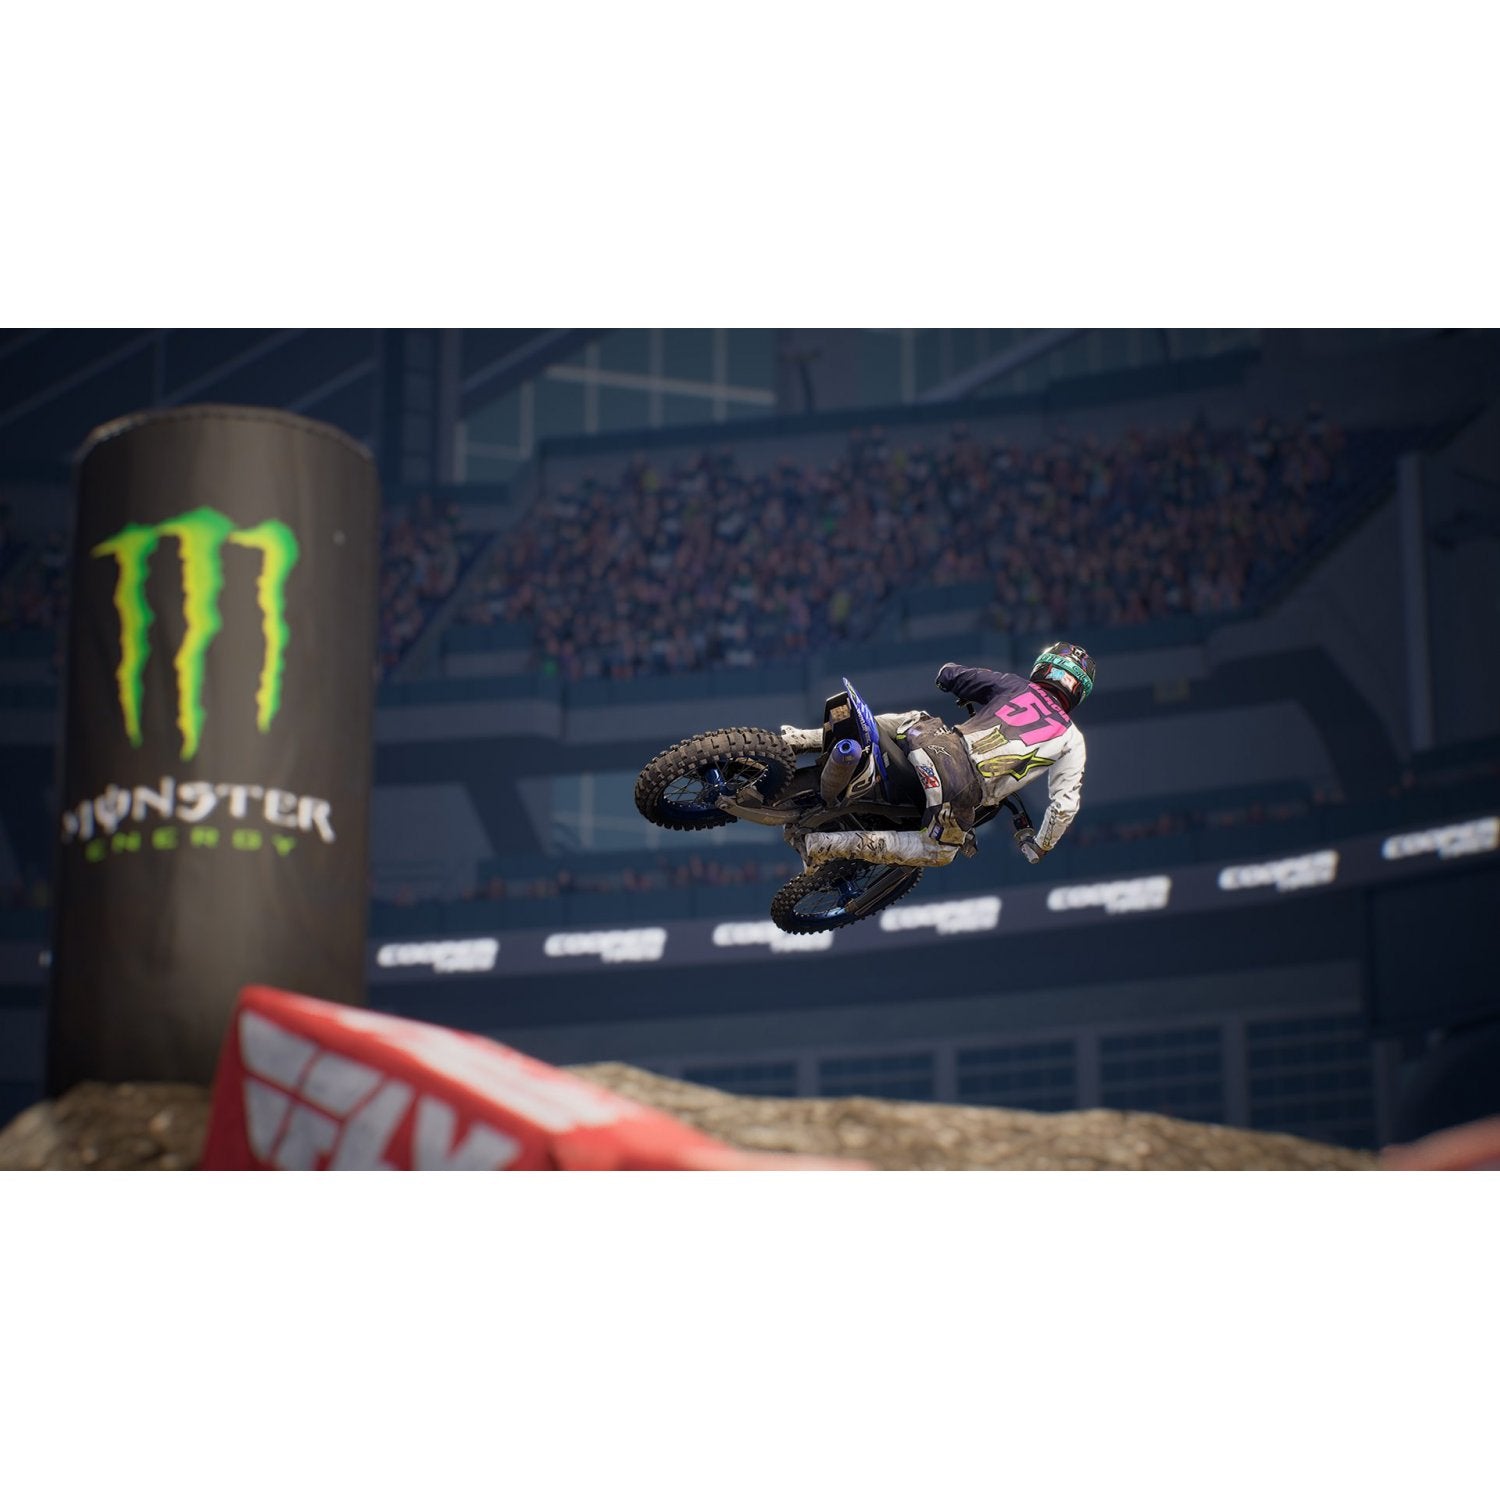 NSW Monster Energy Supercross - The Official Videogame 3